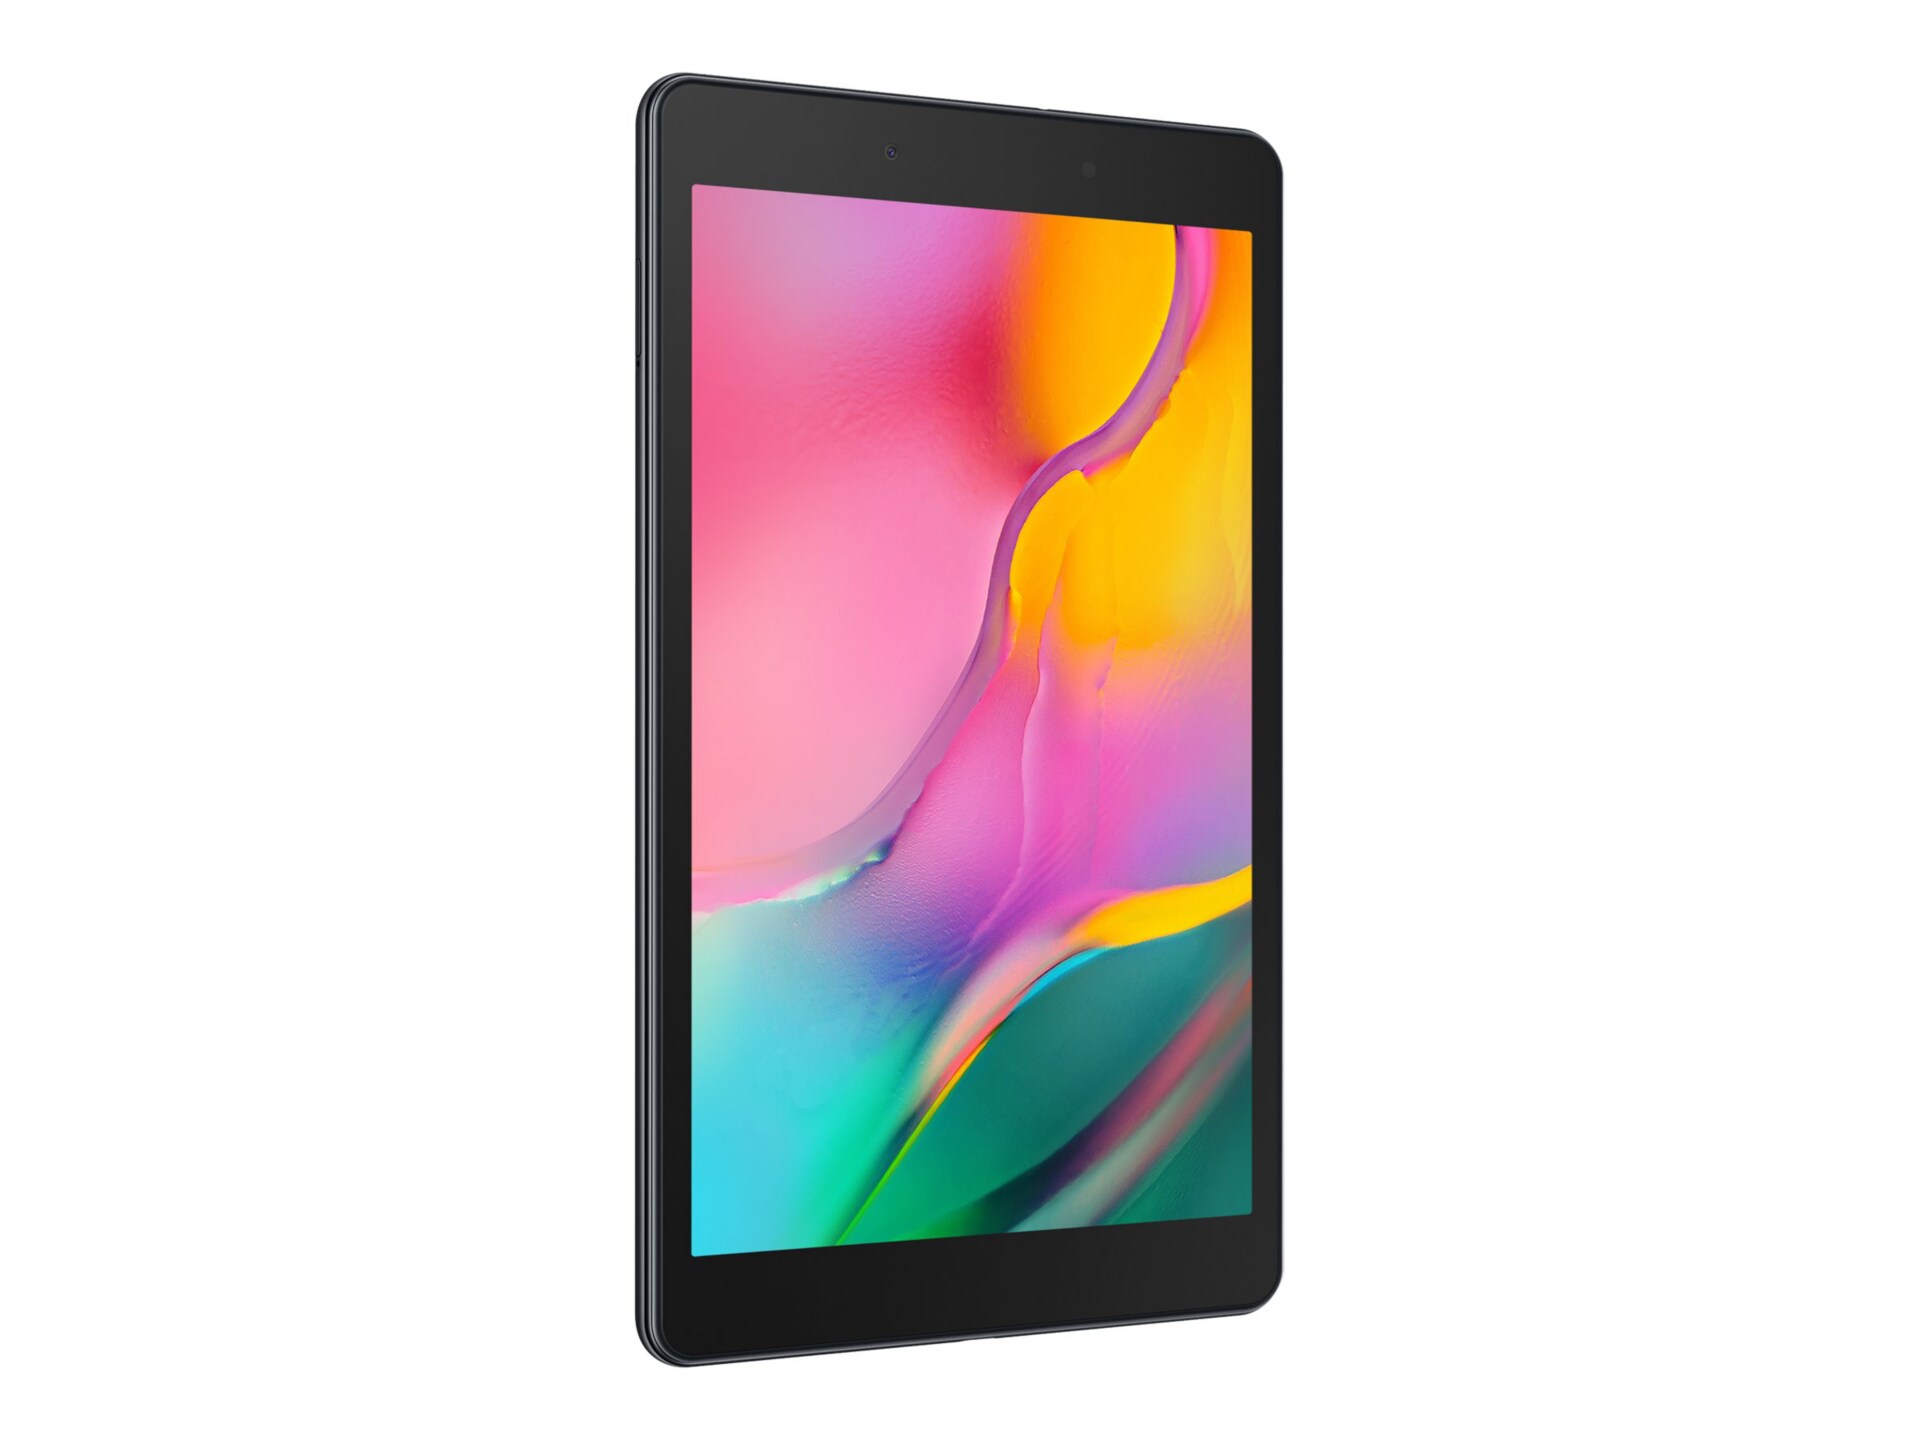 Samsung Galaxy Tab A (2019) tablet Android 9.0 (Pie) 32 GB 8" LIMITED KNOX